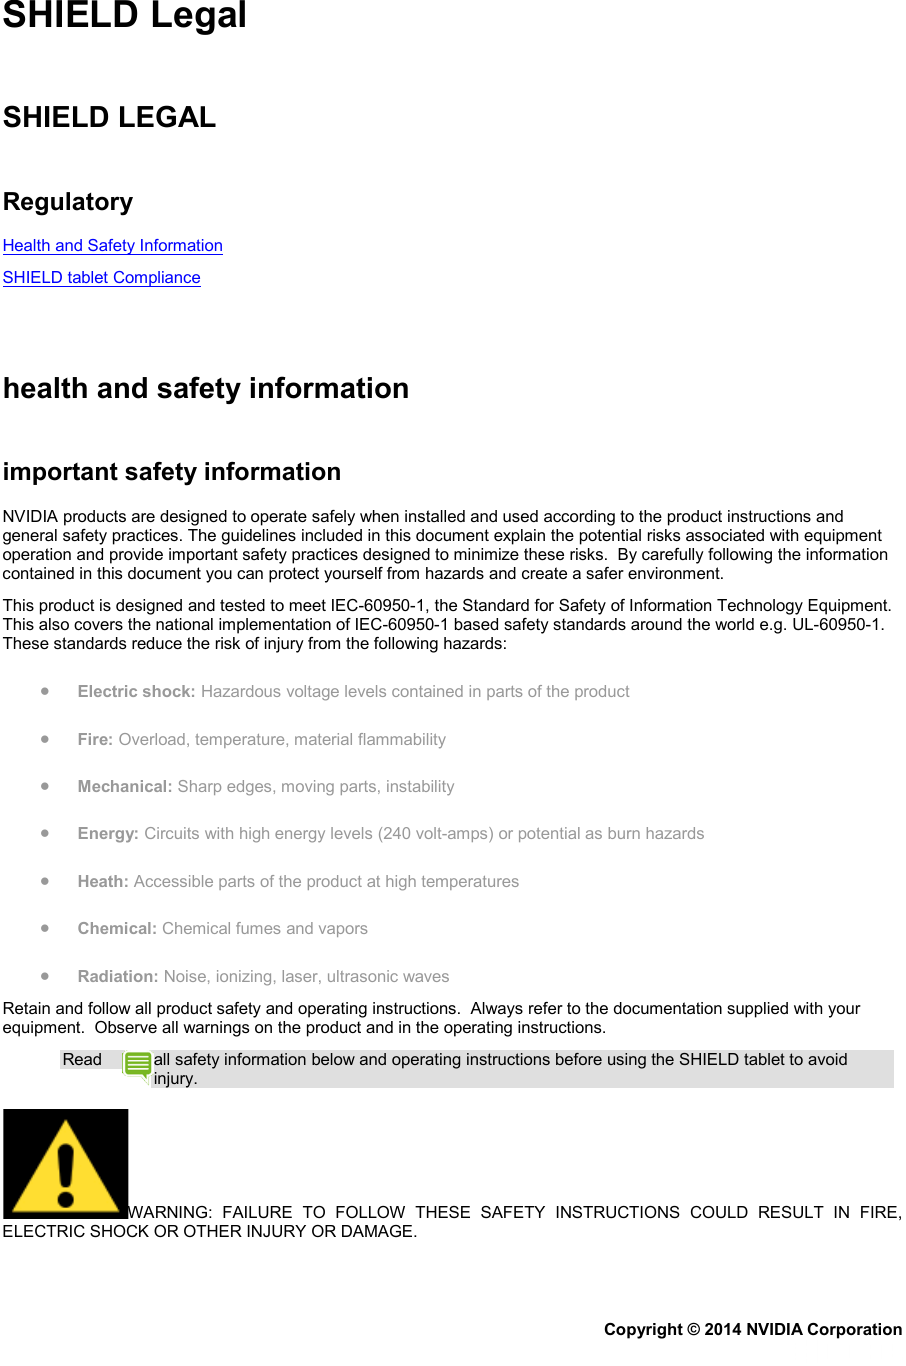 SHIELD Legal   SHIELD LEGAL   Regulatory Health and Safety Information SHIELD tablet Compliance     health and safety information   important safety information NVIDIA products are designed to operate safely when installed and used according to the product instructions and general safety practices. The guidelines included in this document explain the potential risks associated with equipment operation and provide important safety practices designed to minimize these risks.  By carefully following the information contained in this document you can protect yourself from hazards and create a safer environment.  This product is designed and tested to meet IEC-60950-1, the Standard for Safety of Information Technology Equipment. This also covers the national implementation of IEC-60950-1 based safety standards around the world e.g. UL-60950-1. These standards reduce the risk of injury from the following hazards: • Electric shock: Hazardous voltage levels contained in parts of the product • Fire: Overload, temperature, material flammability • Mechanical: Sharp edges, moving parts, instability • Energy: Circuits with high energy levels (240 volt-amps) or potential as burn hazards • Heath: Accessible parts of the product at high temperatures • Chemical: Chemical fumes and vapors • Radiation: Noise, ionizing, laser, ultrasonic waves Retain and follow all product safety and operating instructions.  Always refer to the documentation supplied with your equipment.  Observe all warnings on the product and in the operating instructions. Read  all safety information below and operating instructions before using the SHIELD tablet to avoid injury. WARNING: FAILURE TO FOLLOW THESE SAFETY INSTRUCTIONS COULD RESULT IN FIRE, ELECTRIC SHOCK OR OTHER INJURY OR DAMAGE. Copyright © 2014 NVIDIA Corporation   